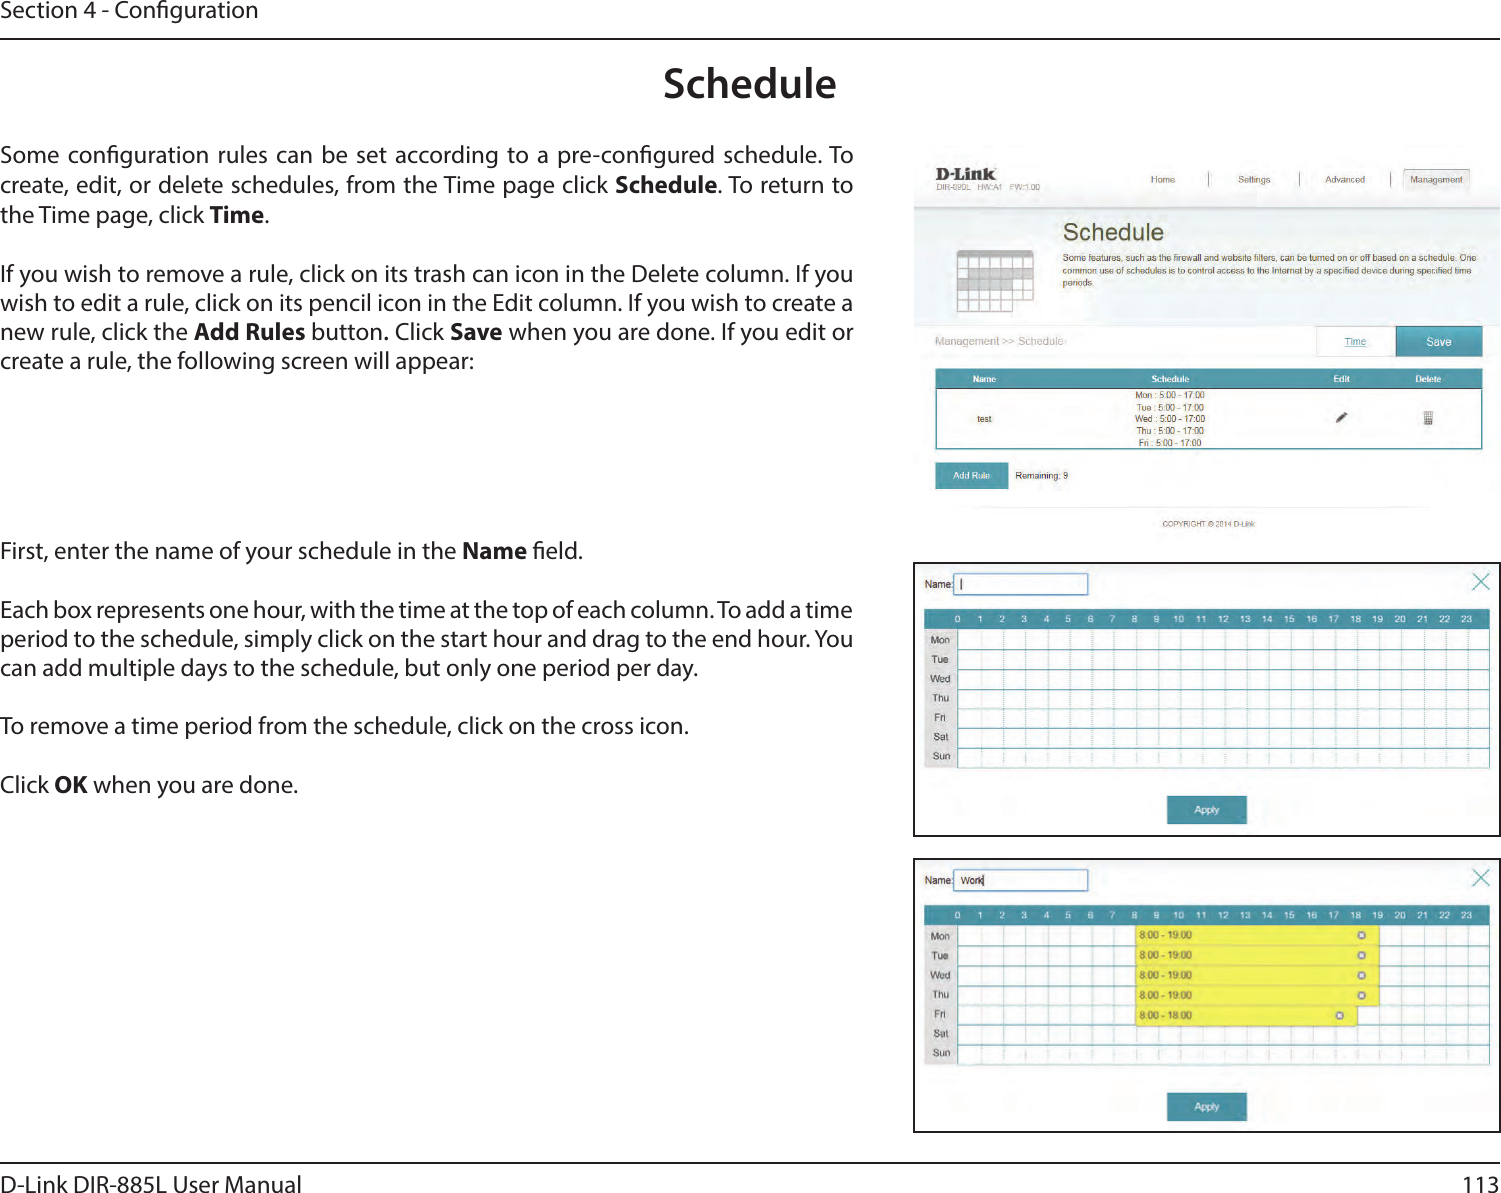 113D-Link DIR-885L User ManualSection 4 - CongurationScheduleSome conguration rules can be set according to a pre-congured schedule. To create, edit, or delete schedules, from the Time page click Schedule. To return to the Time page, click Time. If you wish to remove a rule, click on its trash can icon in the Delete column. If you wish to edit a rule, click on its pencil icon in the Edit column. If you wish to create a new rule, click the Add Rules button. Click Save when you are done. If you edit or create a rule, the following screen will appear:First, enter the name of your schedule in the Name eld.Each box represents one hour, with the time at the top of each column. To add a time period to the schedule, simply click on the start hour and drag to the end hour. You can add multiple days to the schedule, but only one period per day.To remove a time period from the schedule, click on the cross icon.Click OK when you are done.